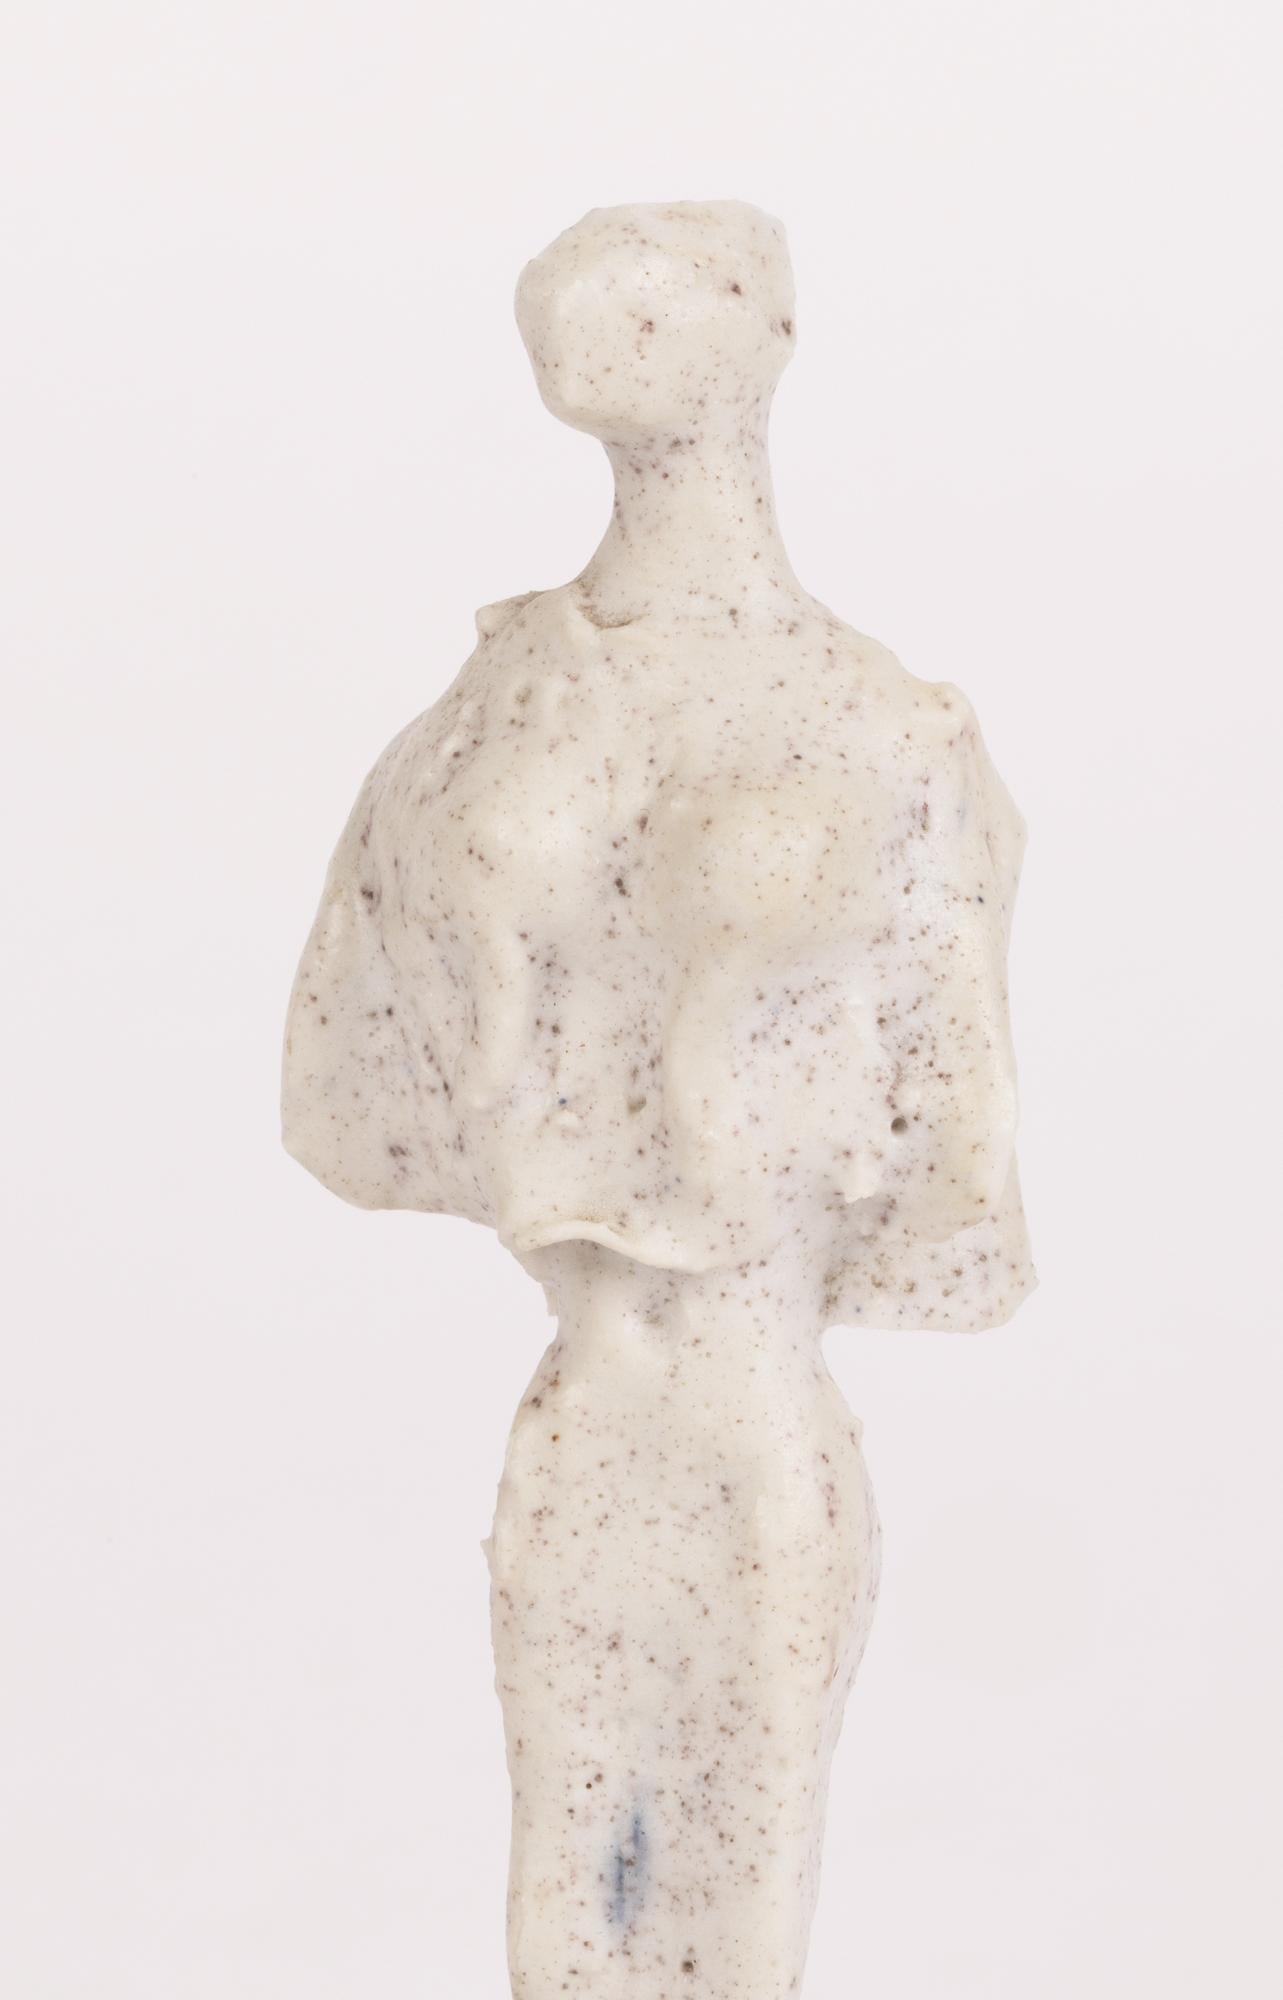 A very fine mid-century studio pottery sculptural figure of a lady by renowned potter Adam Dworski (Croatian, 1917-2011) and probably made in his early days at the Wye Pottery in Wales. 

Adam Dworski started the Wye Pottery in the 1950’s having